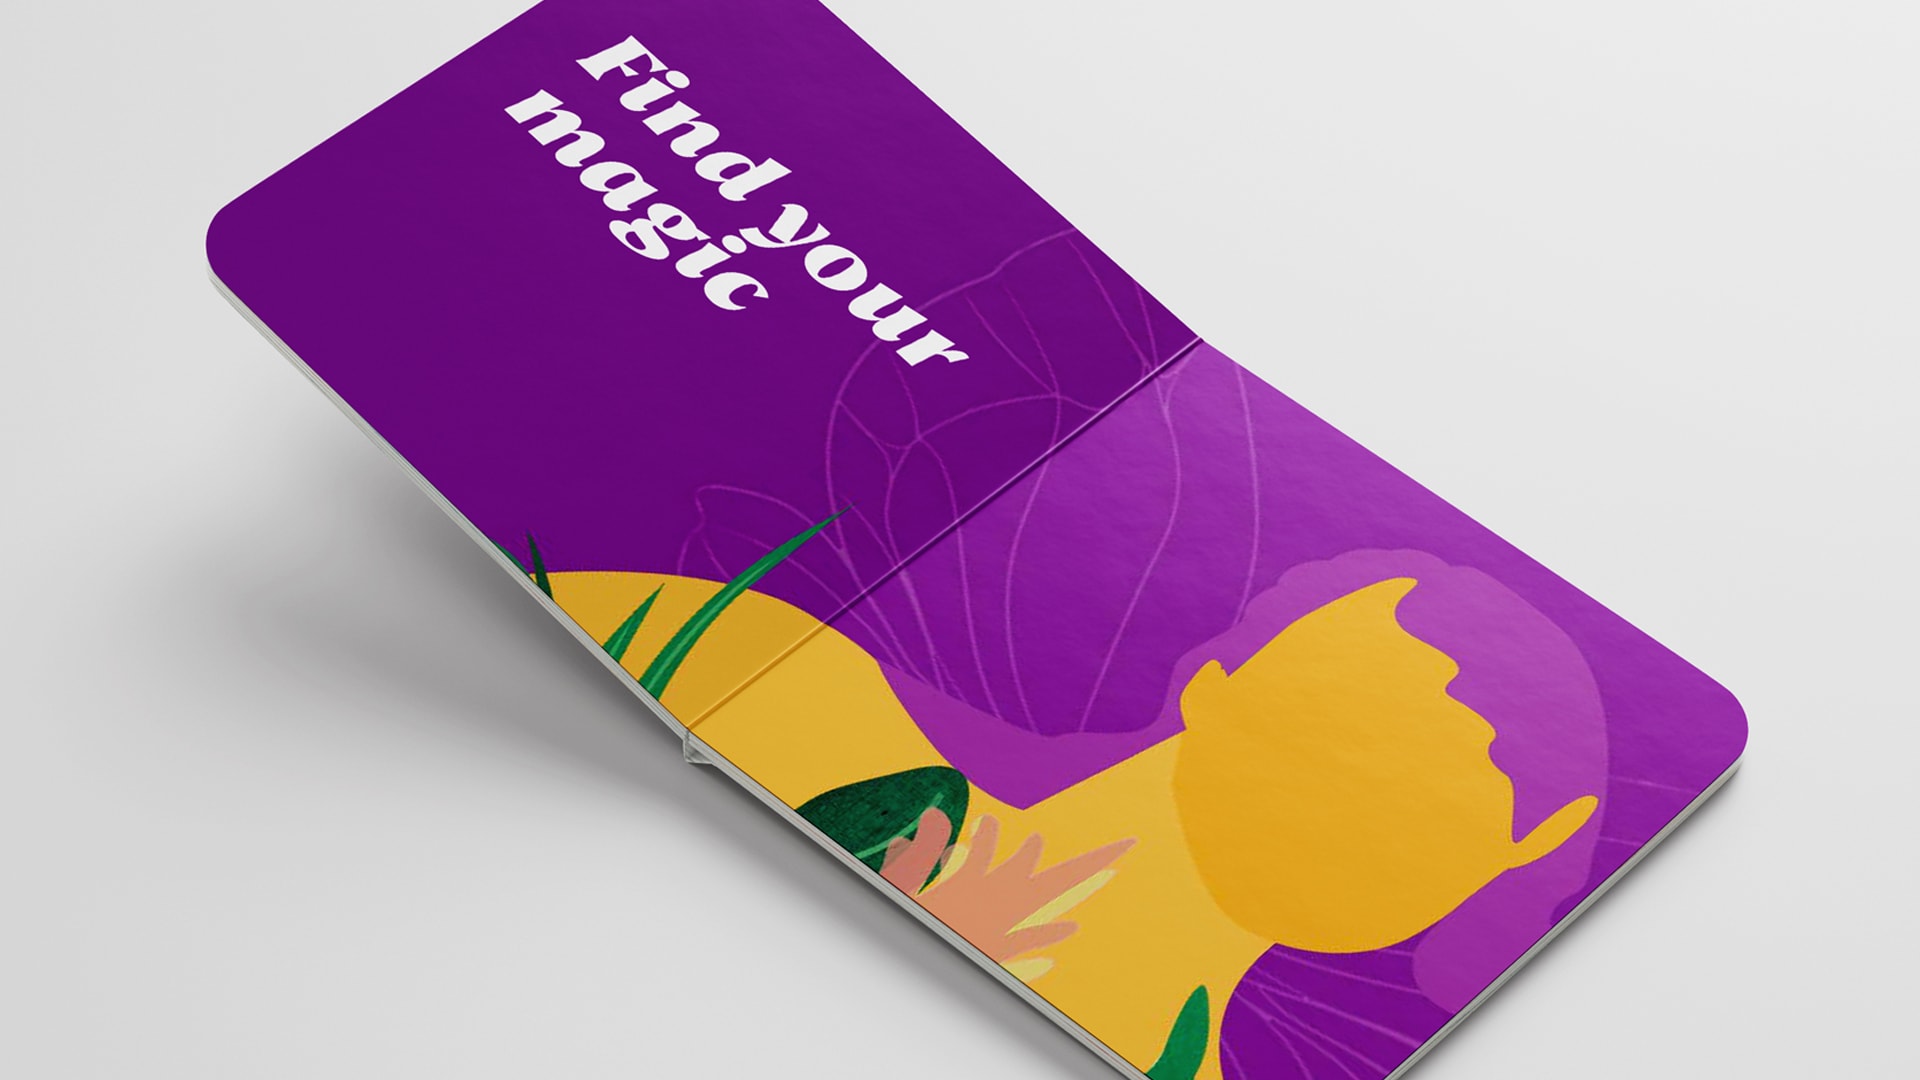 An image of an inside book cover design displaying the Faerie branding consisting of close up of the fairy's face. The words 'Find your magic' are displayed